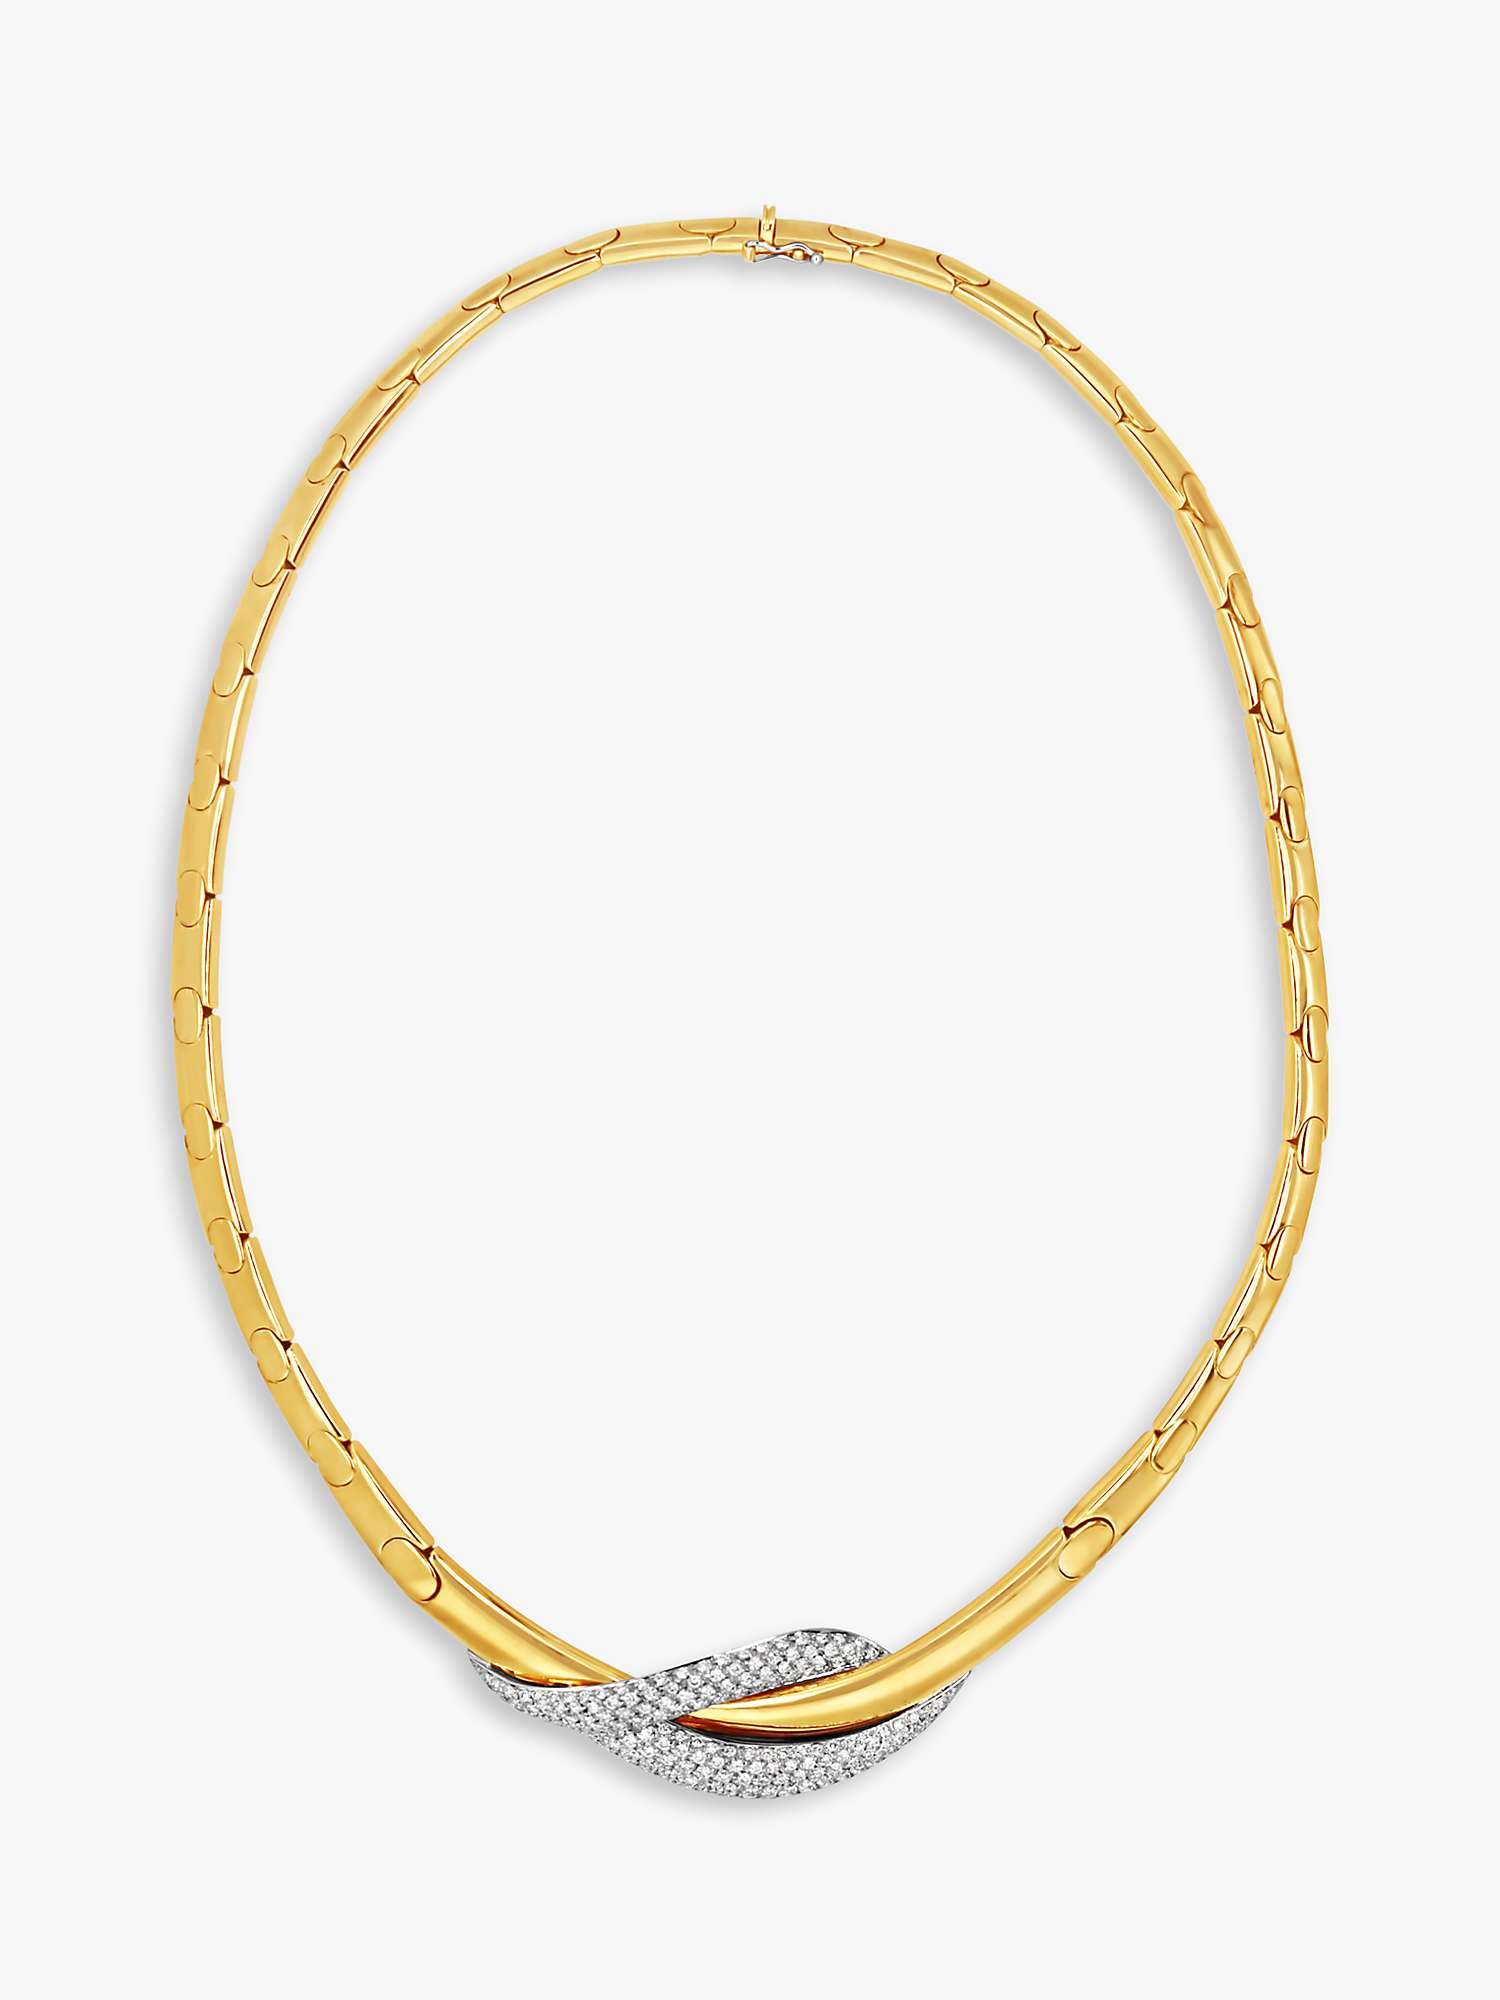 Buy Milton & Humble Jewellery Second Hand Wempe 18ct Gold Pave Diamond Collarette Necklace, Gold Online at johnlewis.com